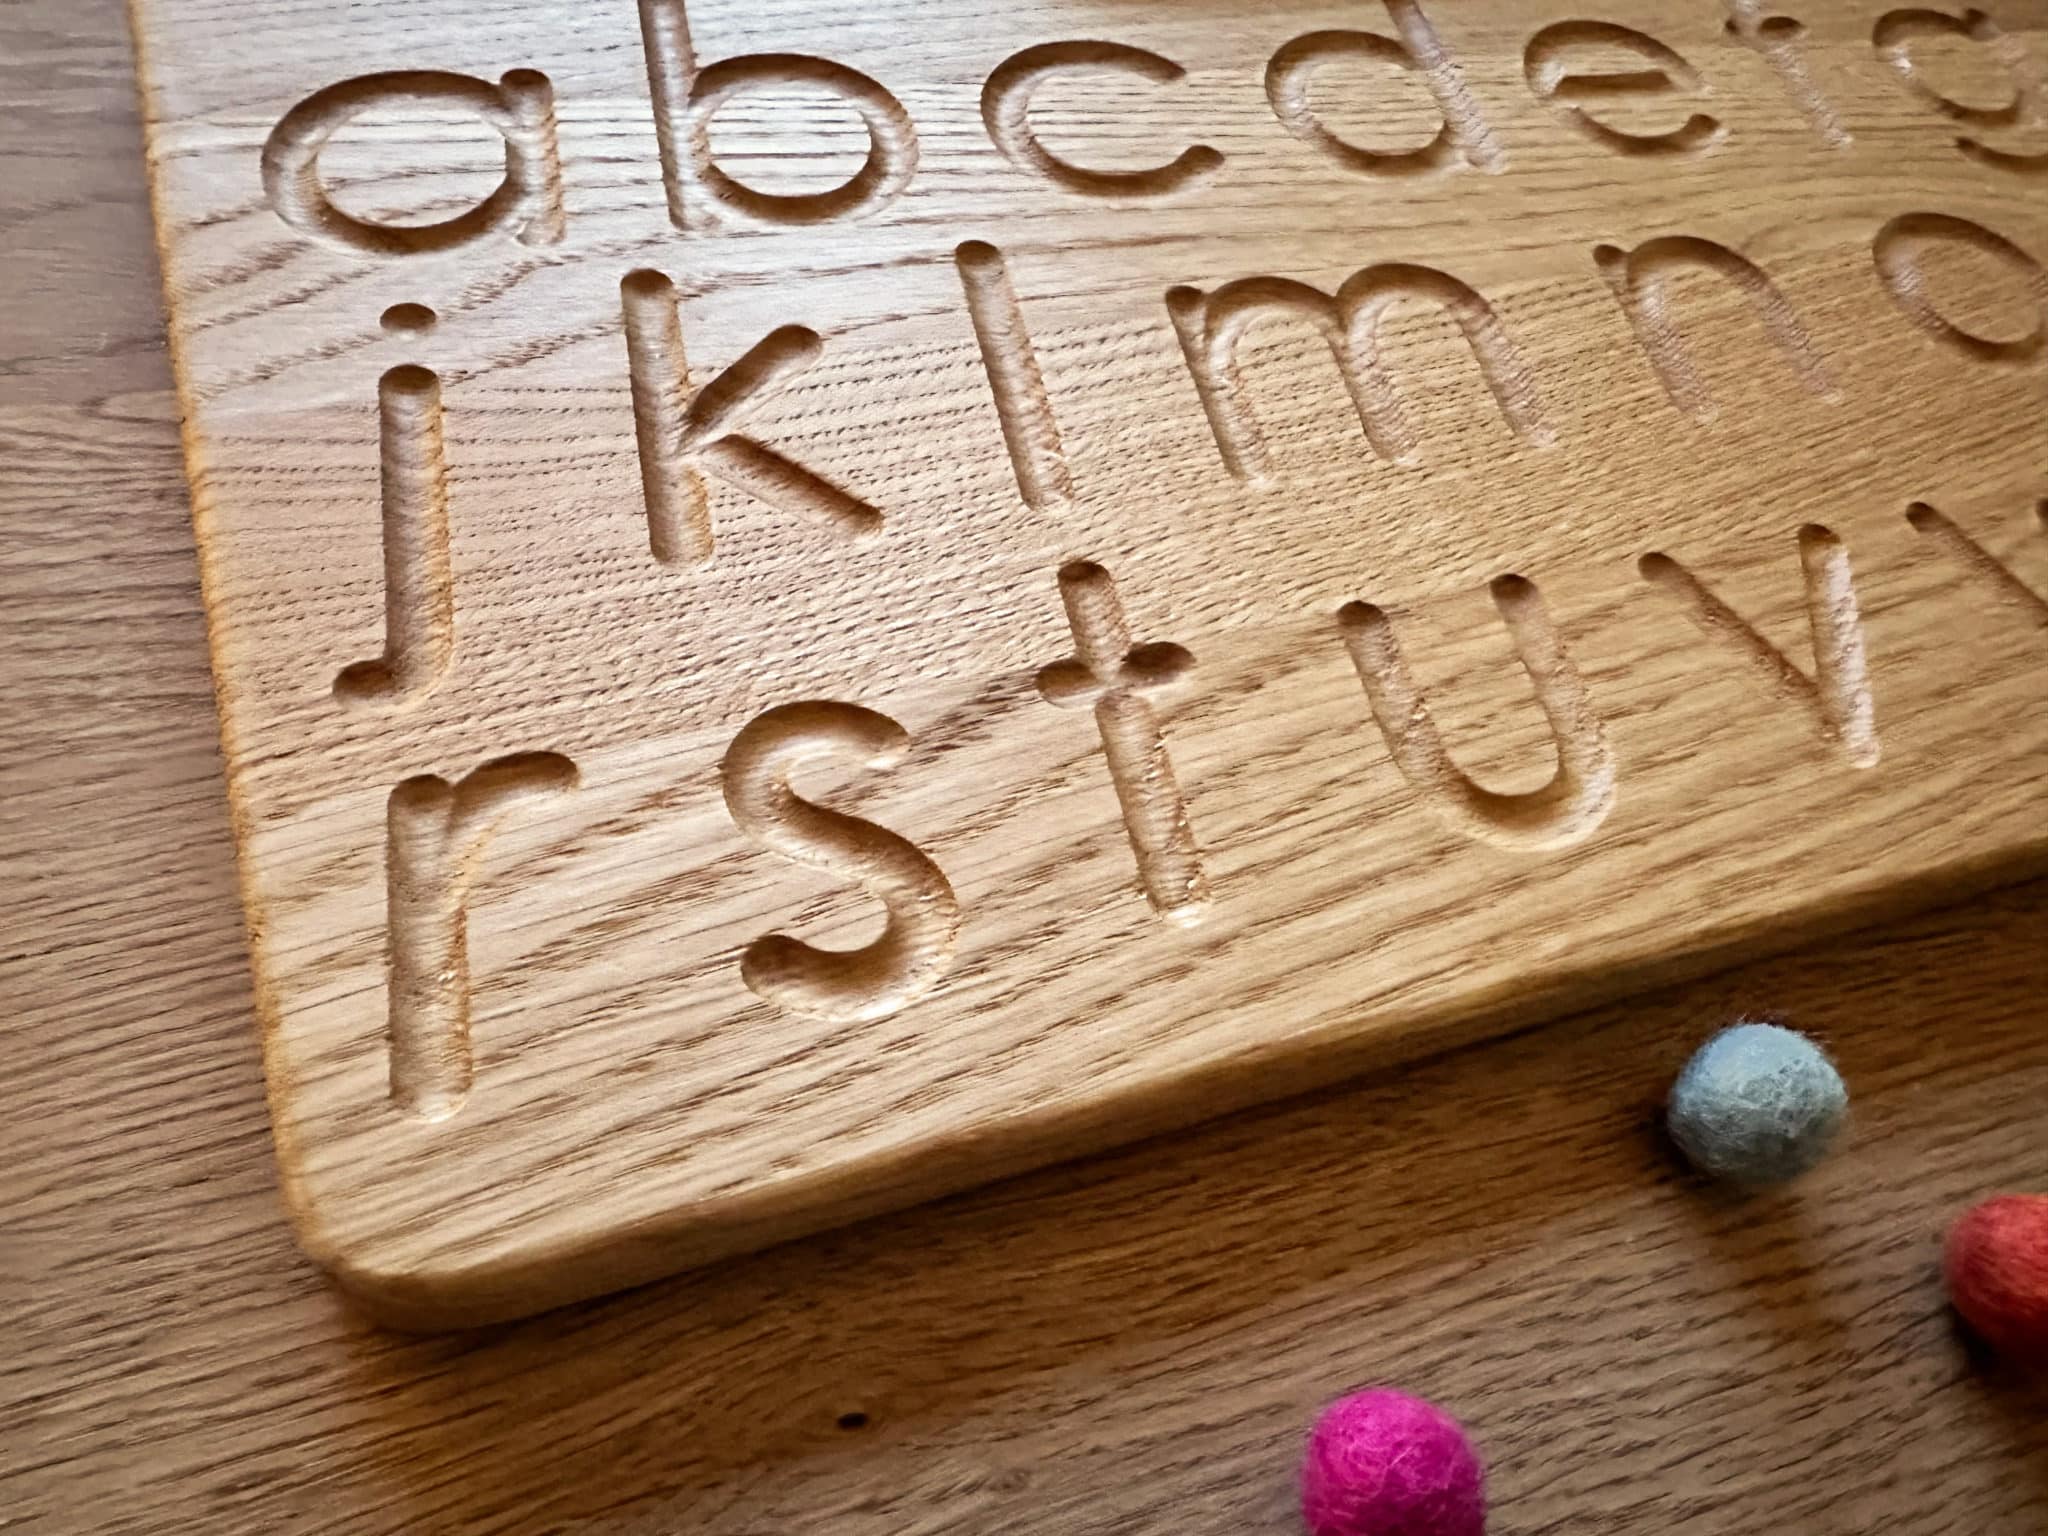 One-sided wooden alphabet tracing board: English - Threewood